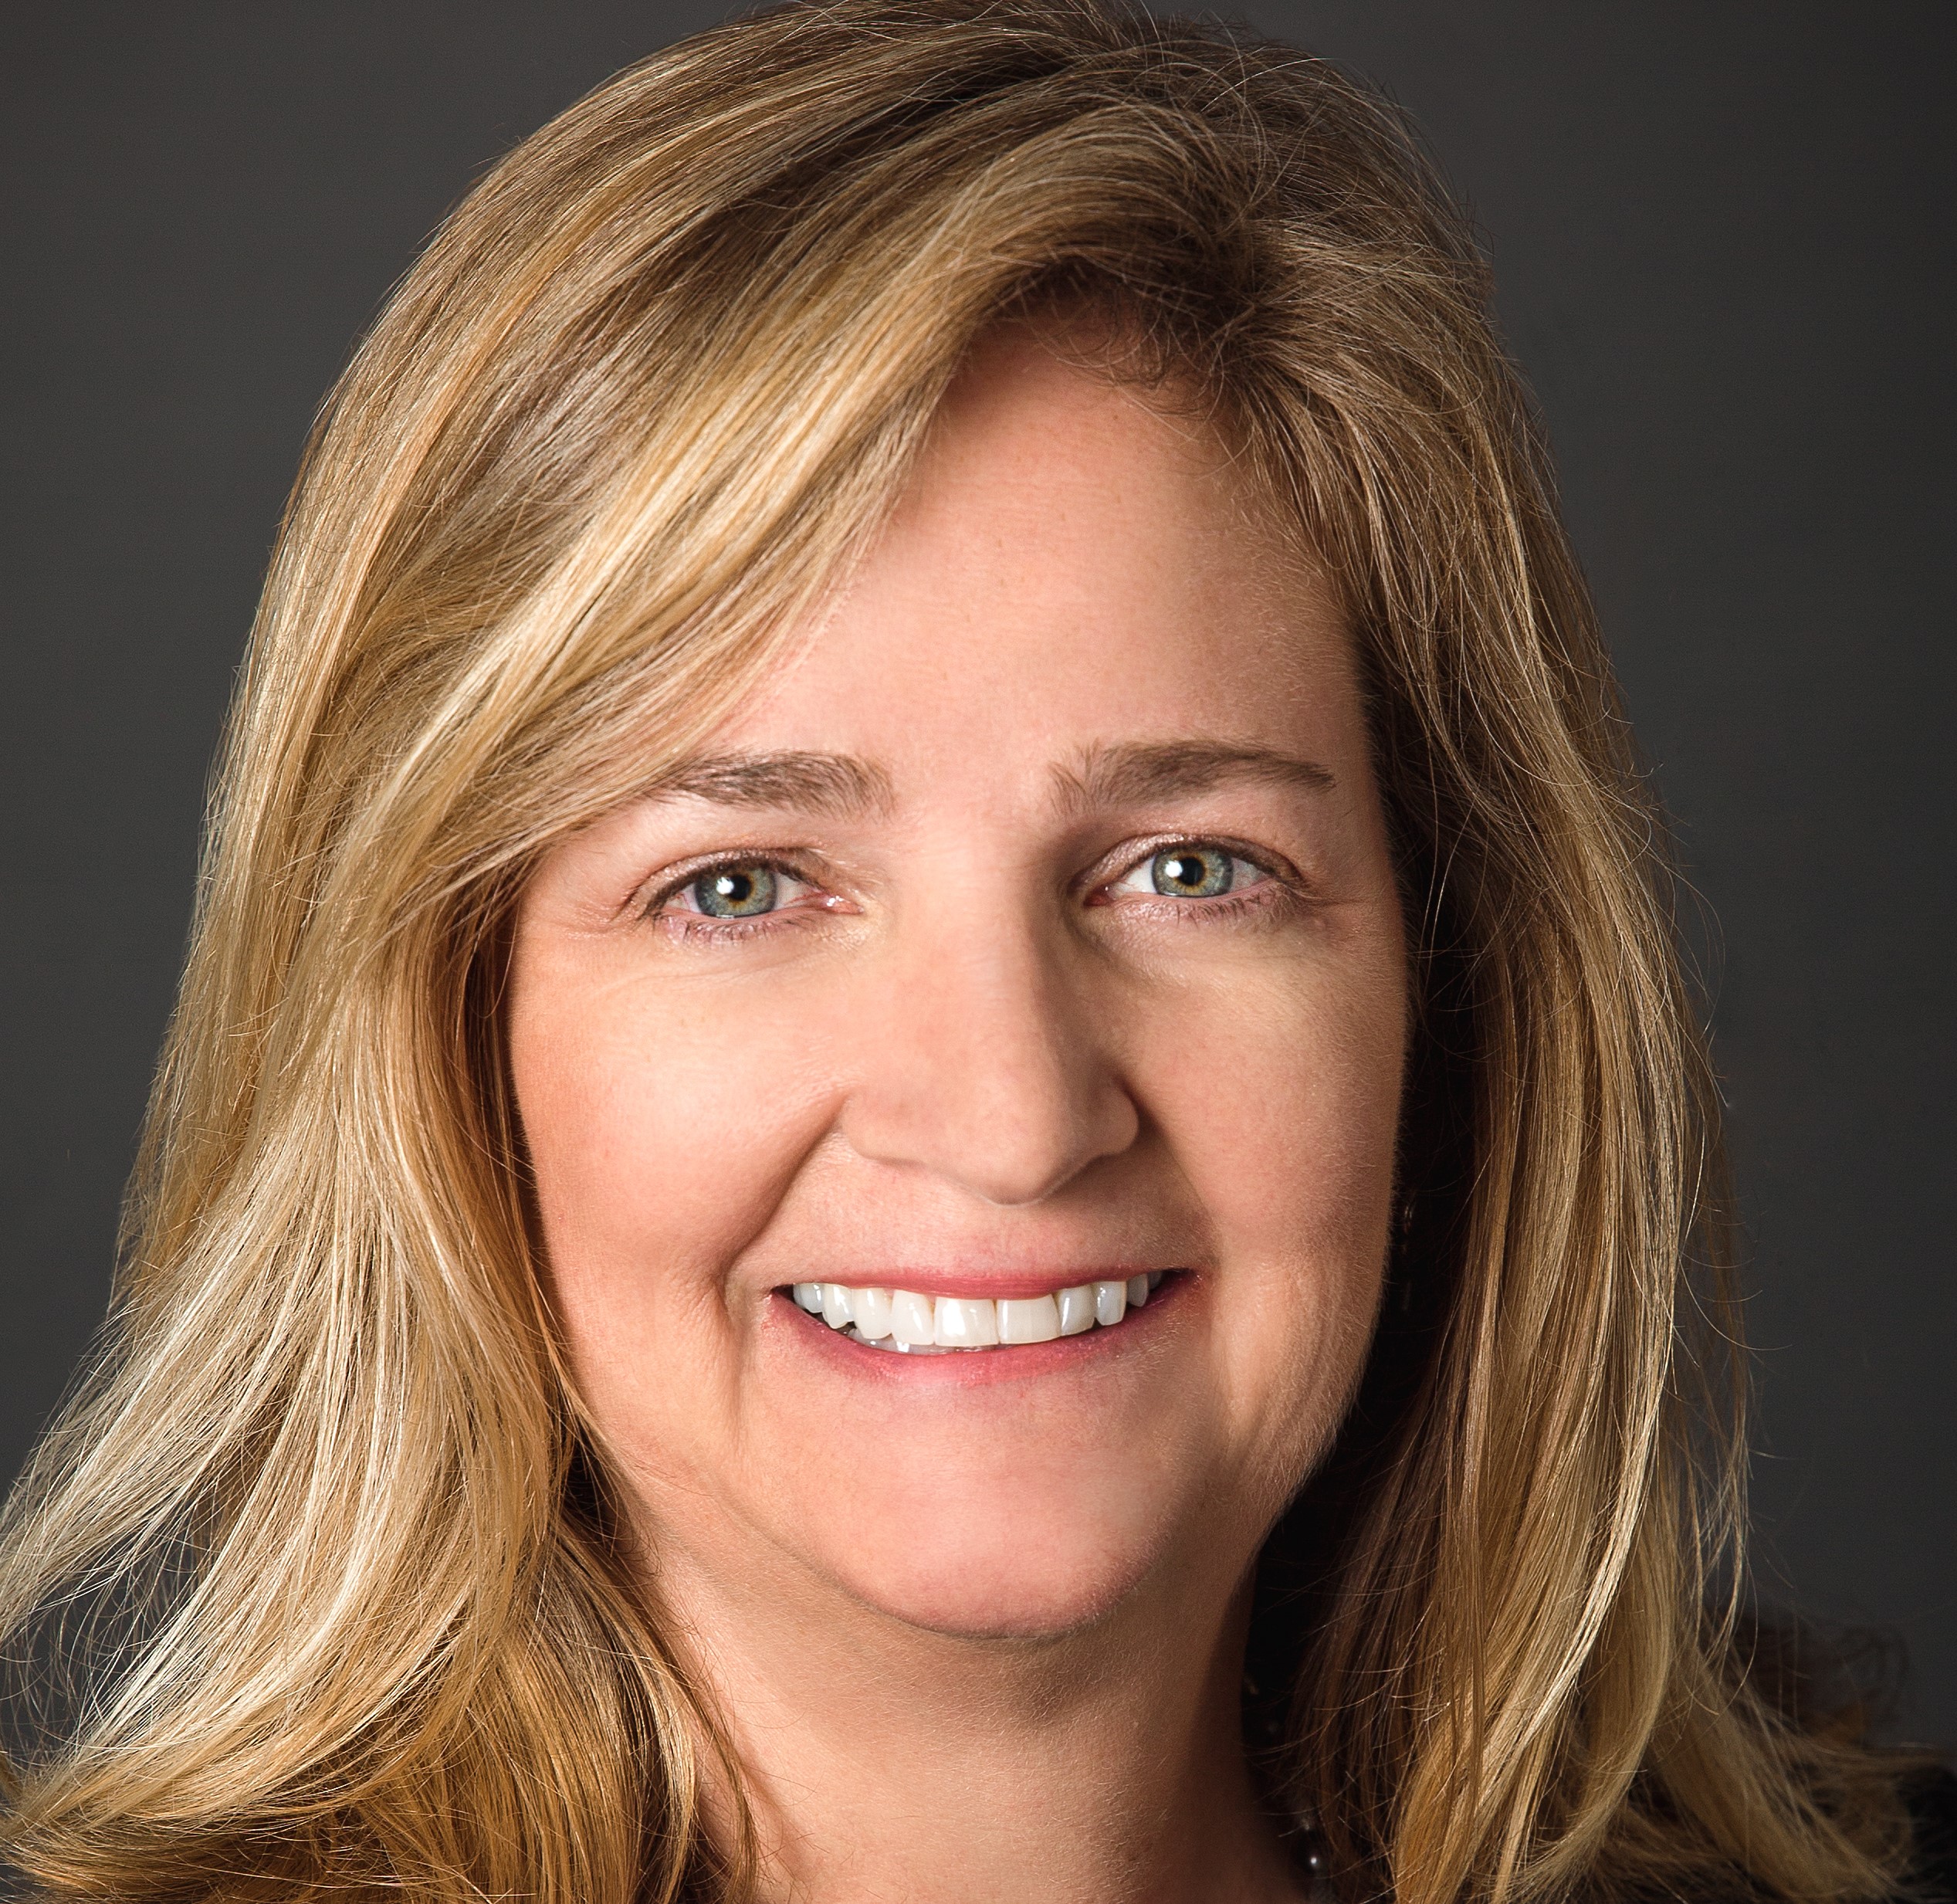 The 2022 Women Leaders In Technology: Kim Clarke | Consulting Magazine